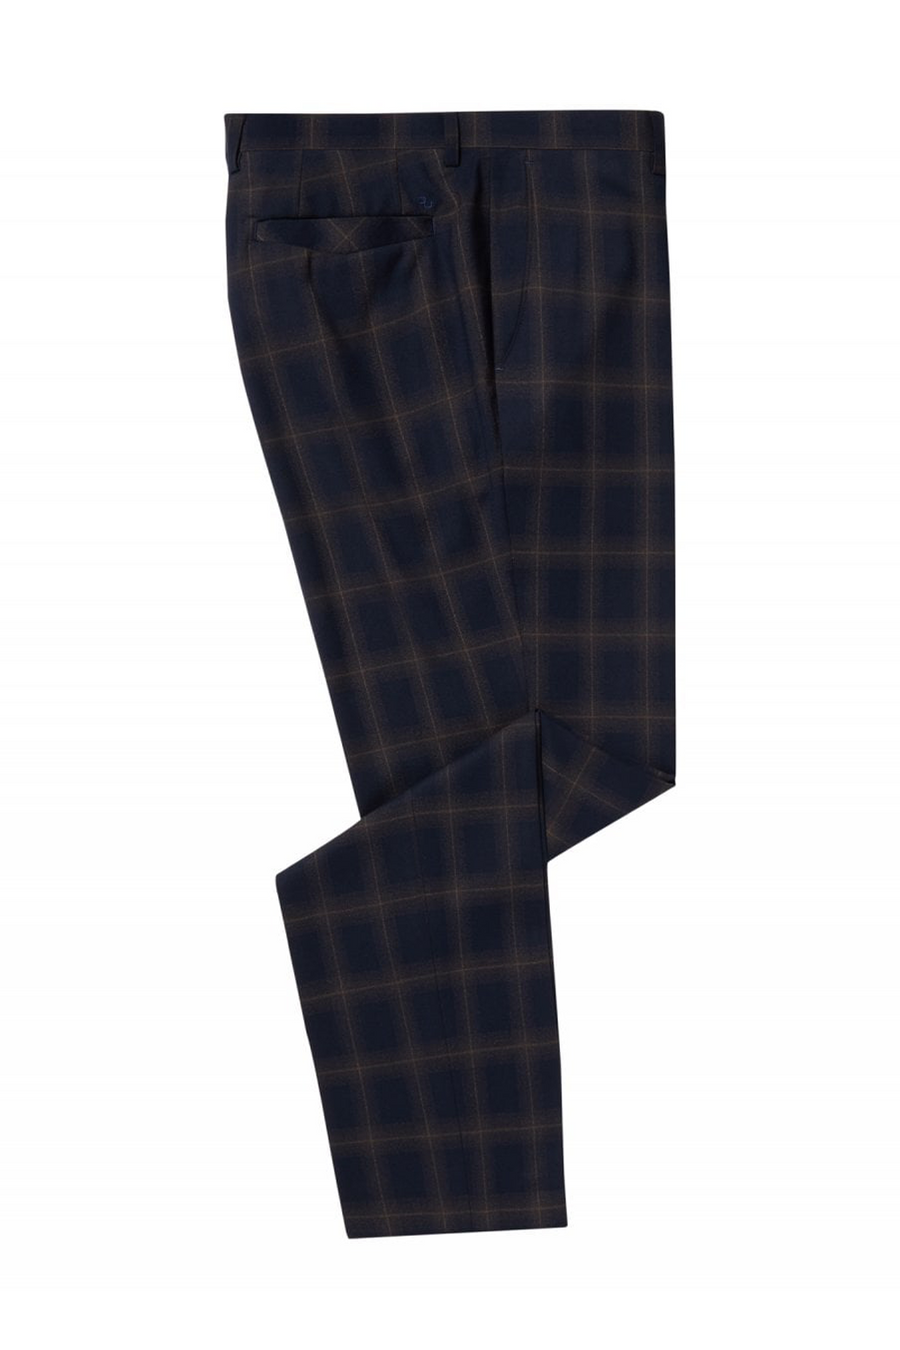 Buy the Remus Uomo Check Trouser Navy at Intro. Spend £50 for free UK delivery. Official stockists. We ship worldwide.